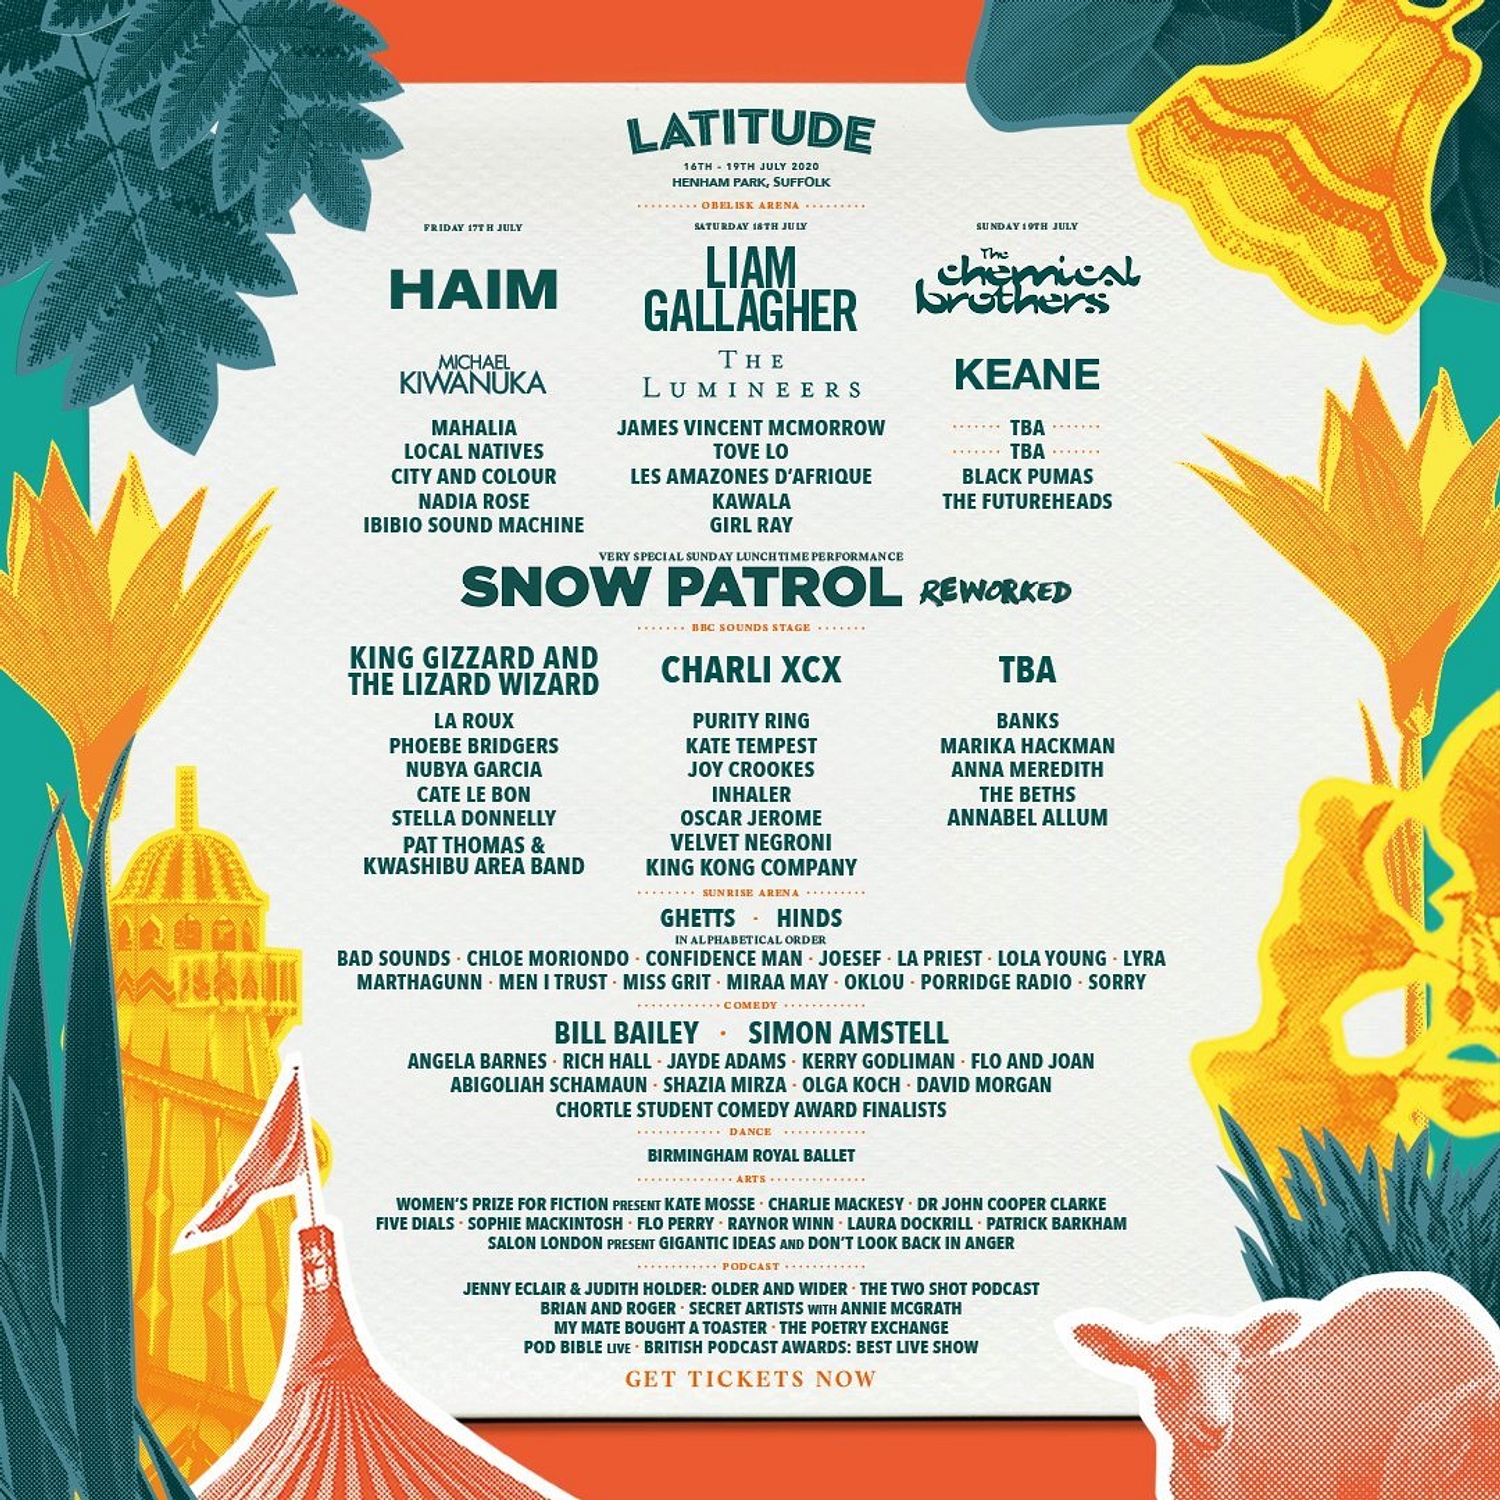 King Gizzard and The Lizard Wizard, Mahalia, Sorry and more join Latitude 2020 lineup